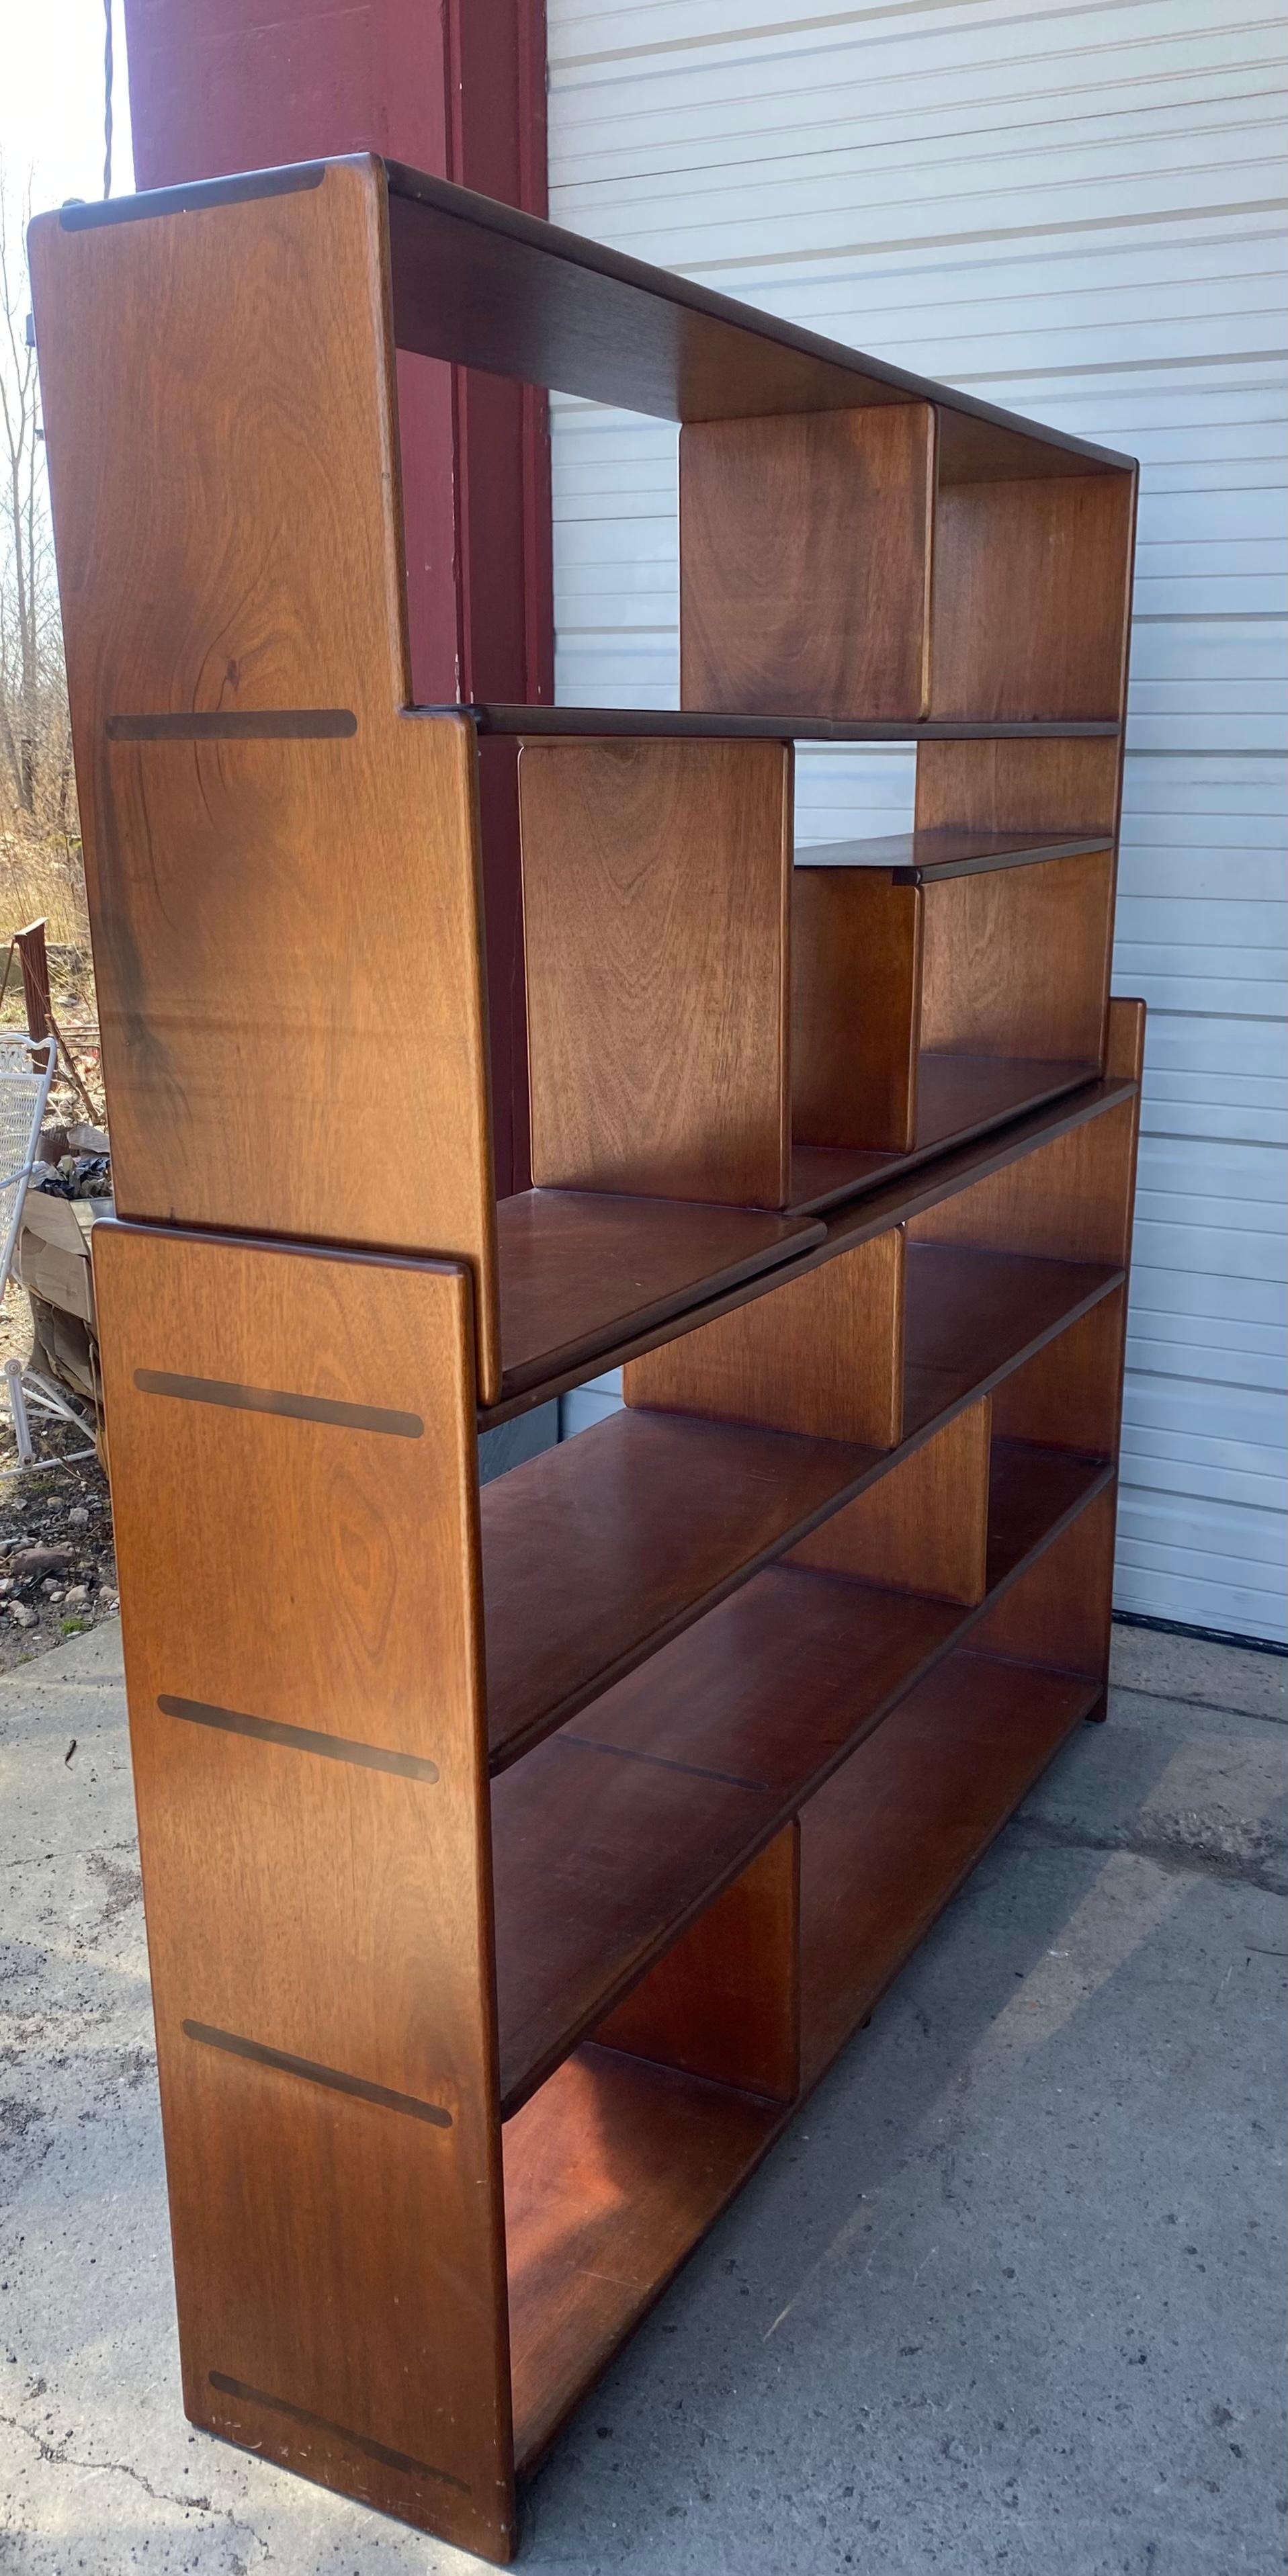 Hand-Crafted Stunning American Crafts Modernist Bench-Made Bookcase, Divider, Shelving